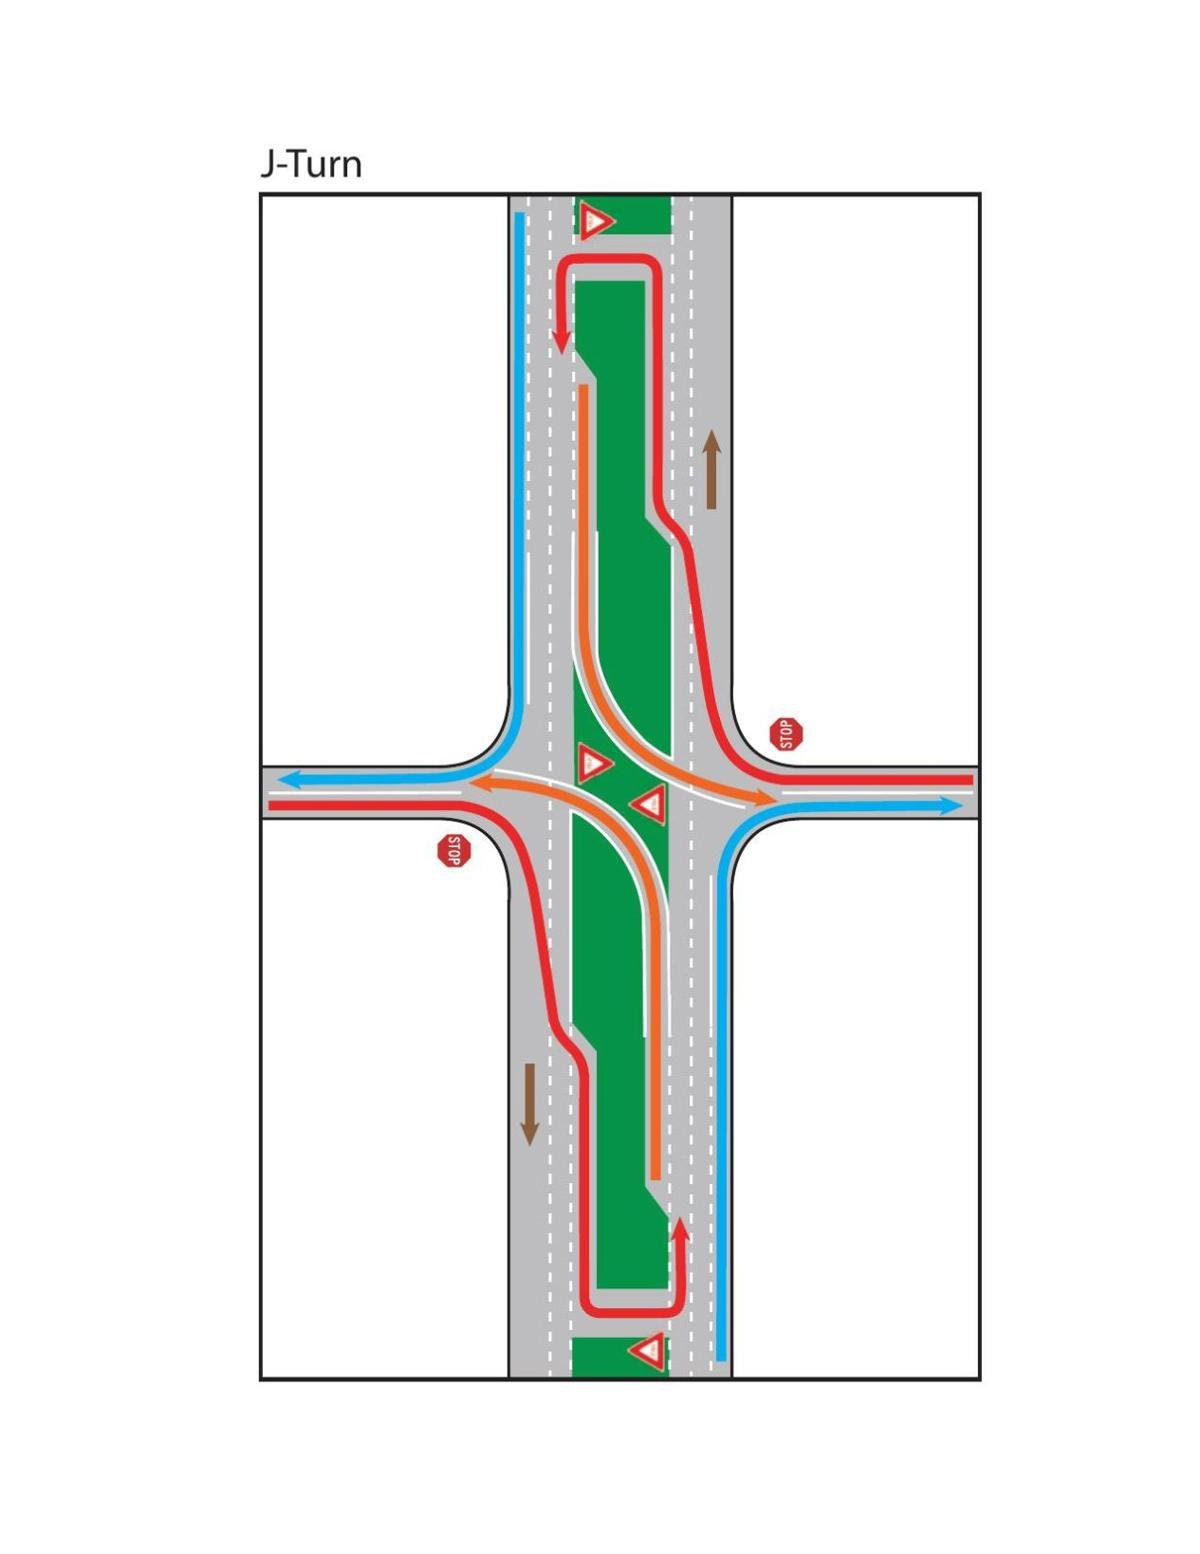 The image below illustrates a typical J-turn. This isn’t the design for this specific project